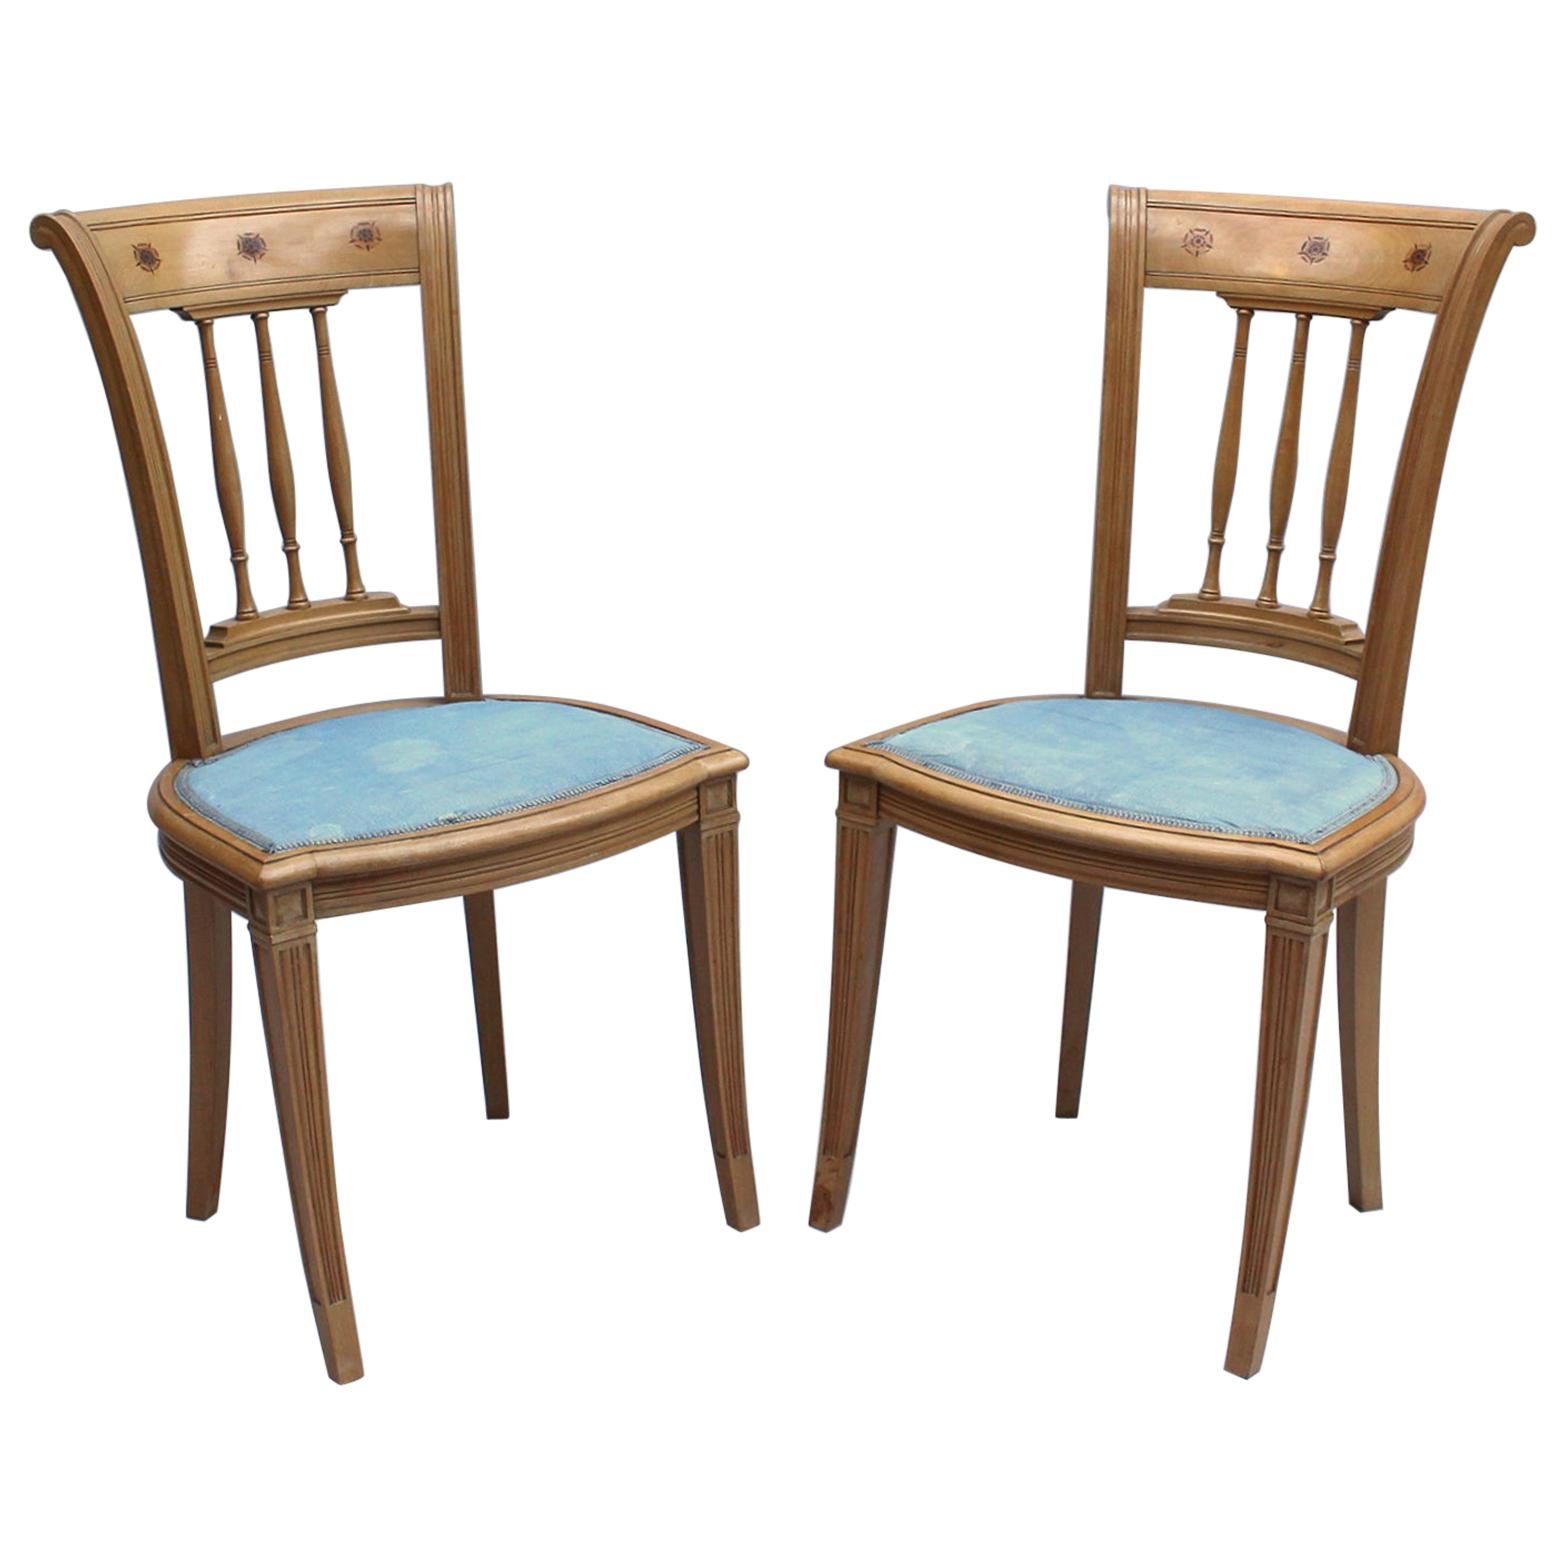 2 Fine French Art Deco Chairs by R. Damon & Bertaux